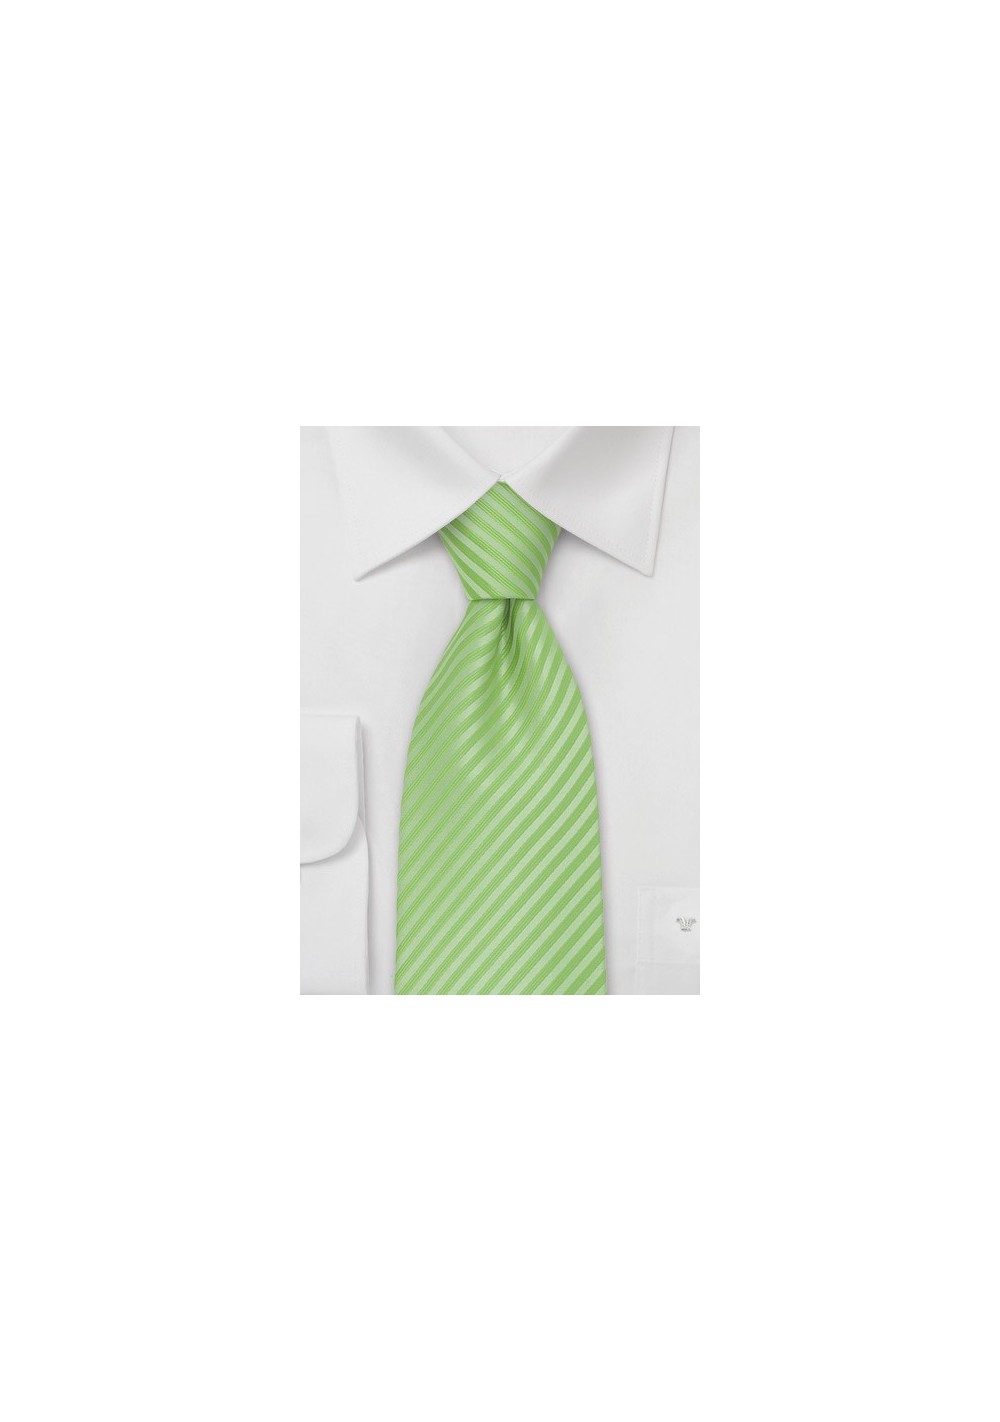 Striped Tie in Fresh Lime